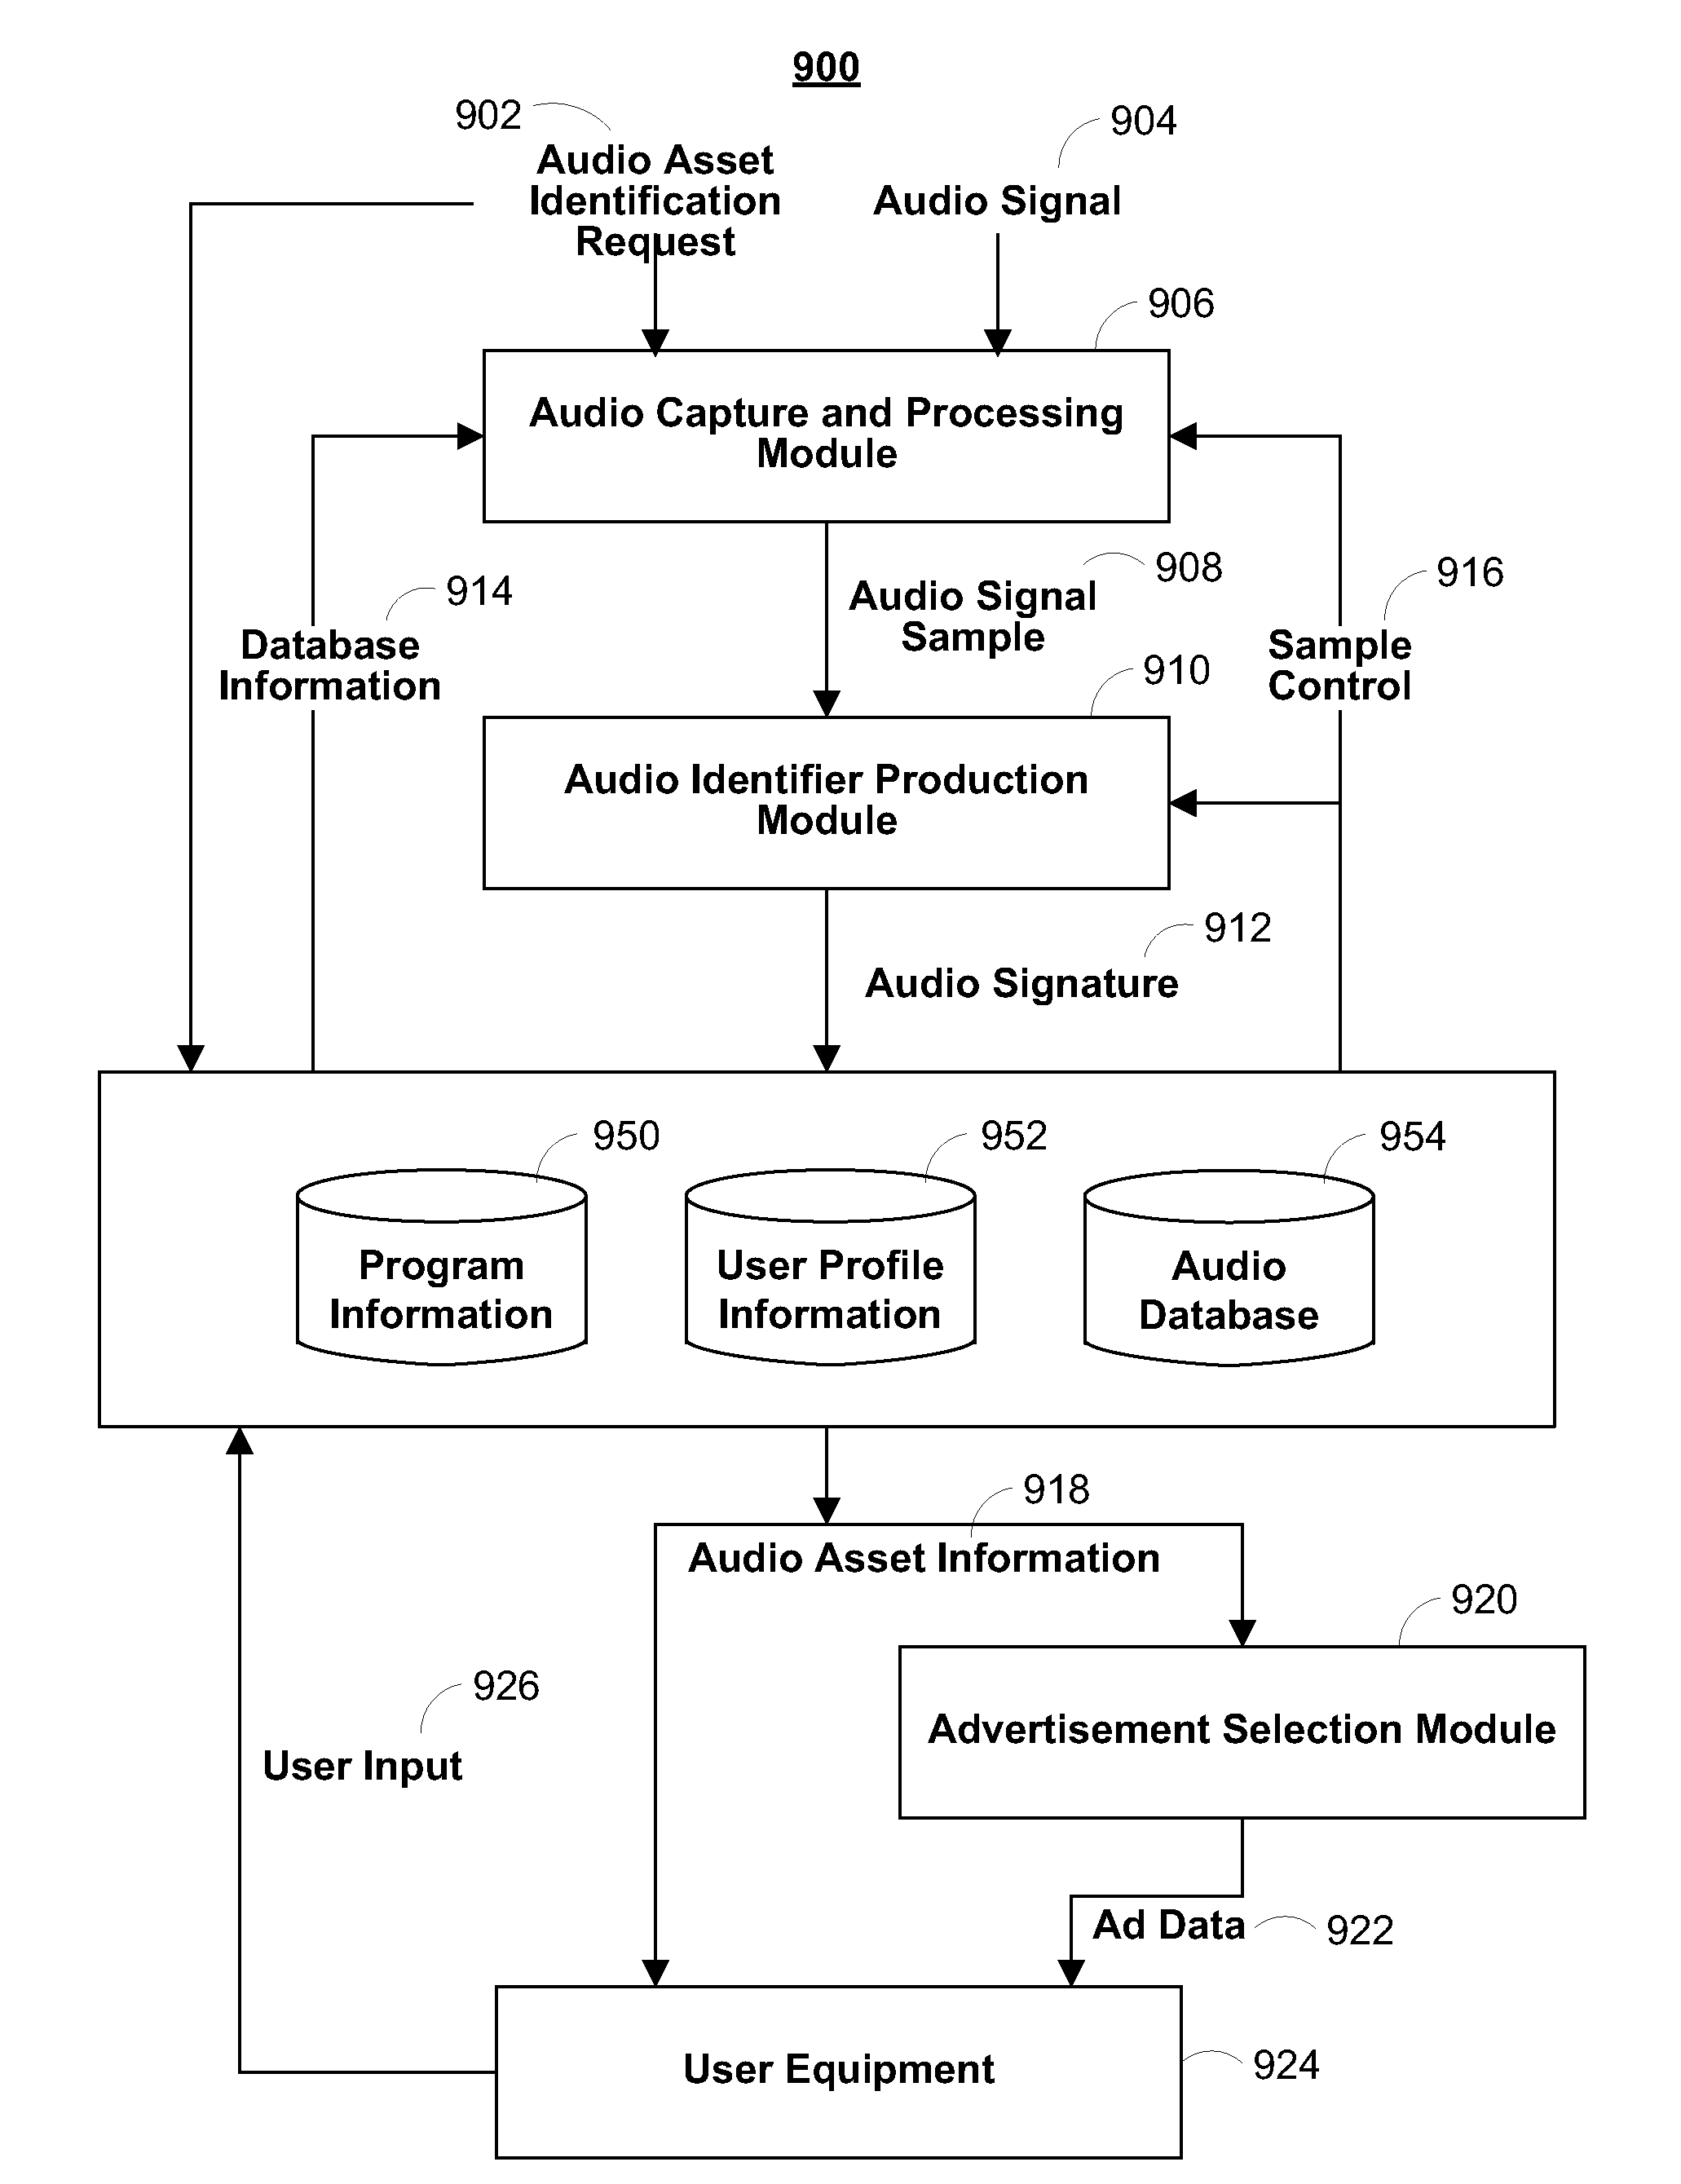 Systems and methods for identifying audio content using an interactive media guidance application